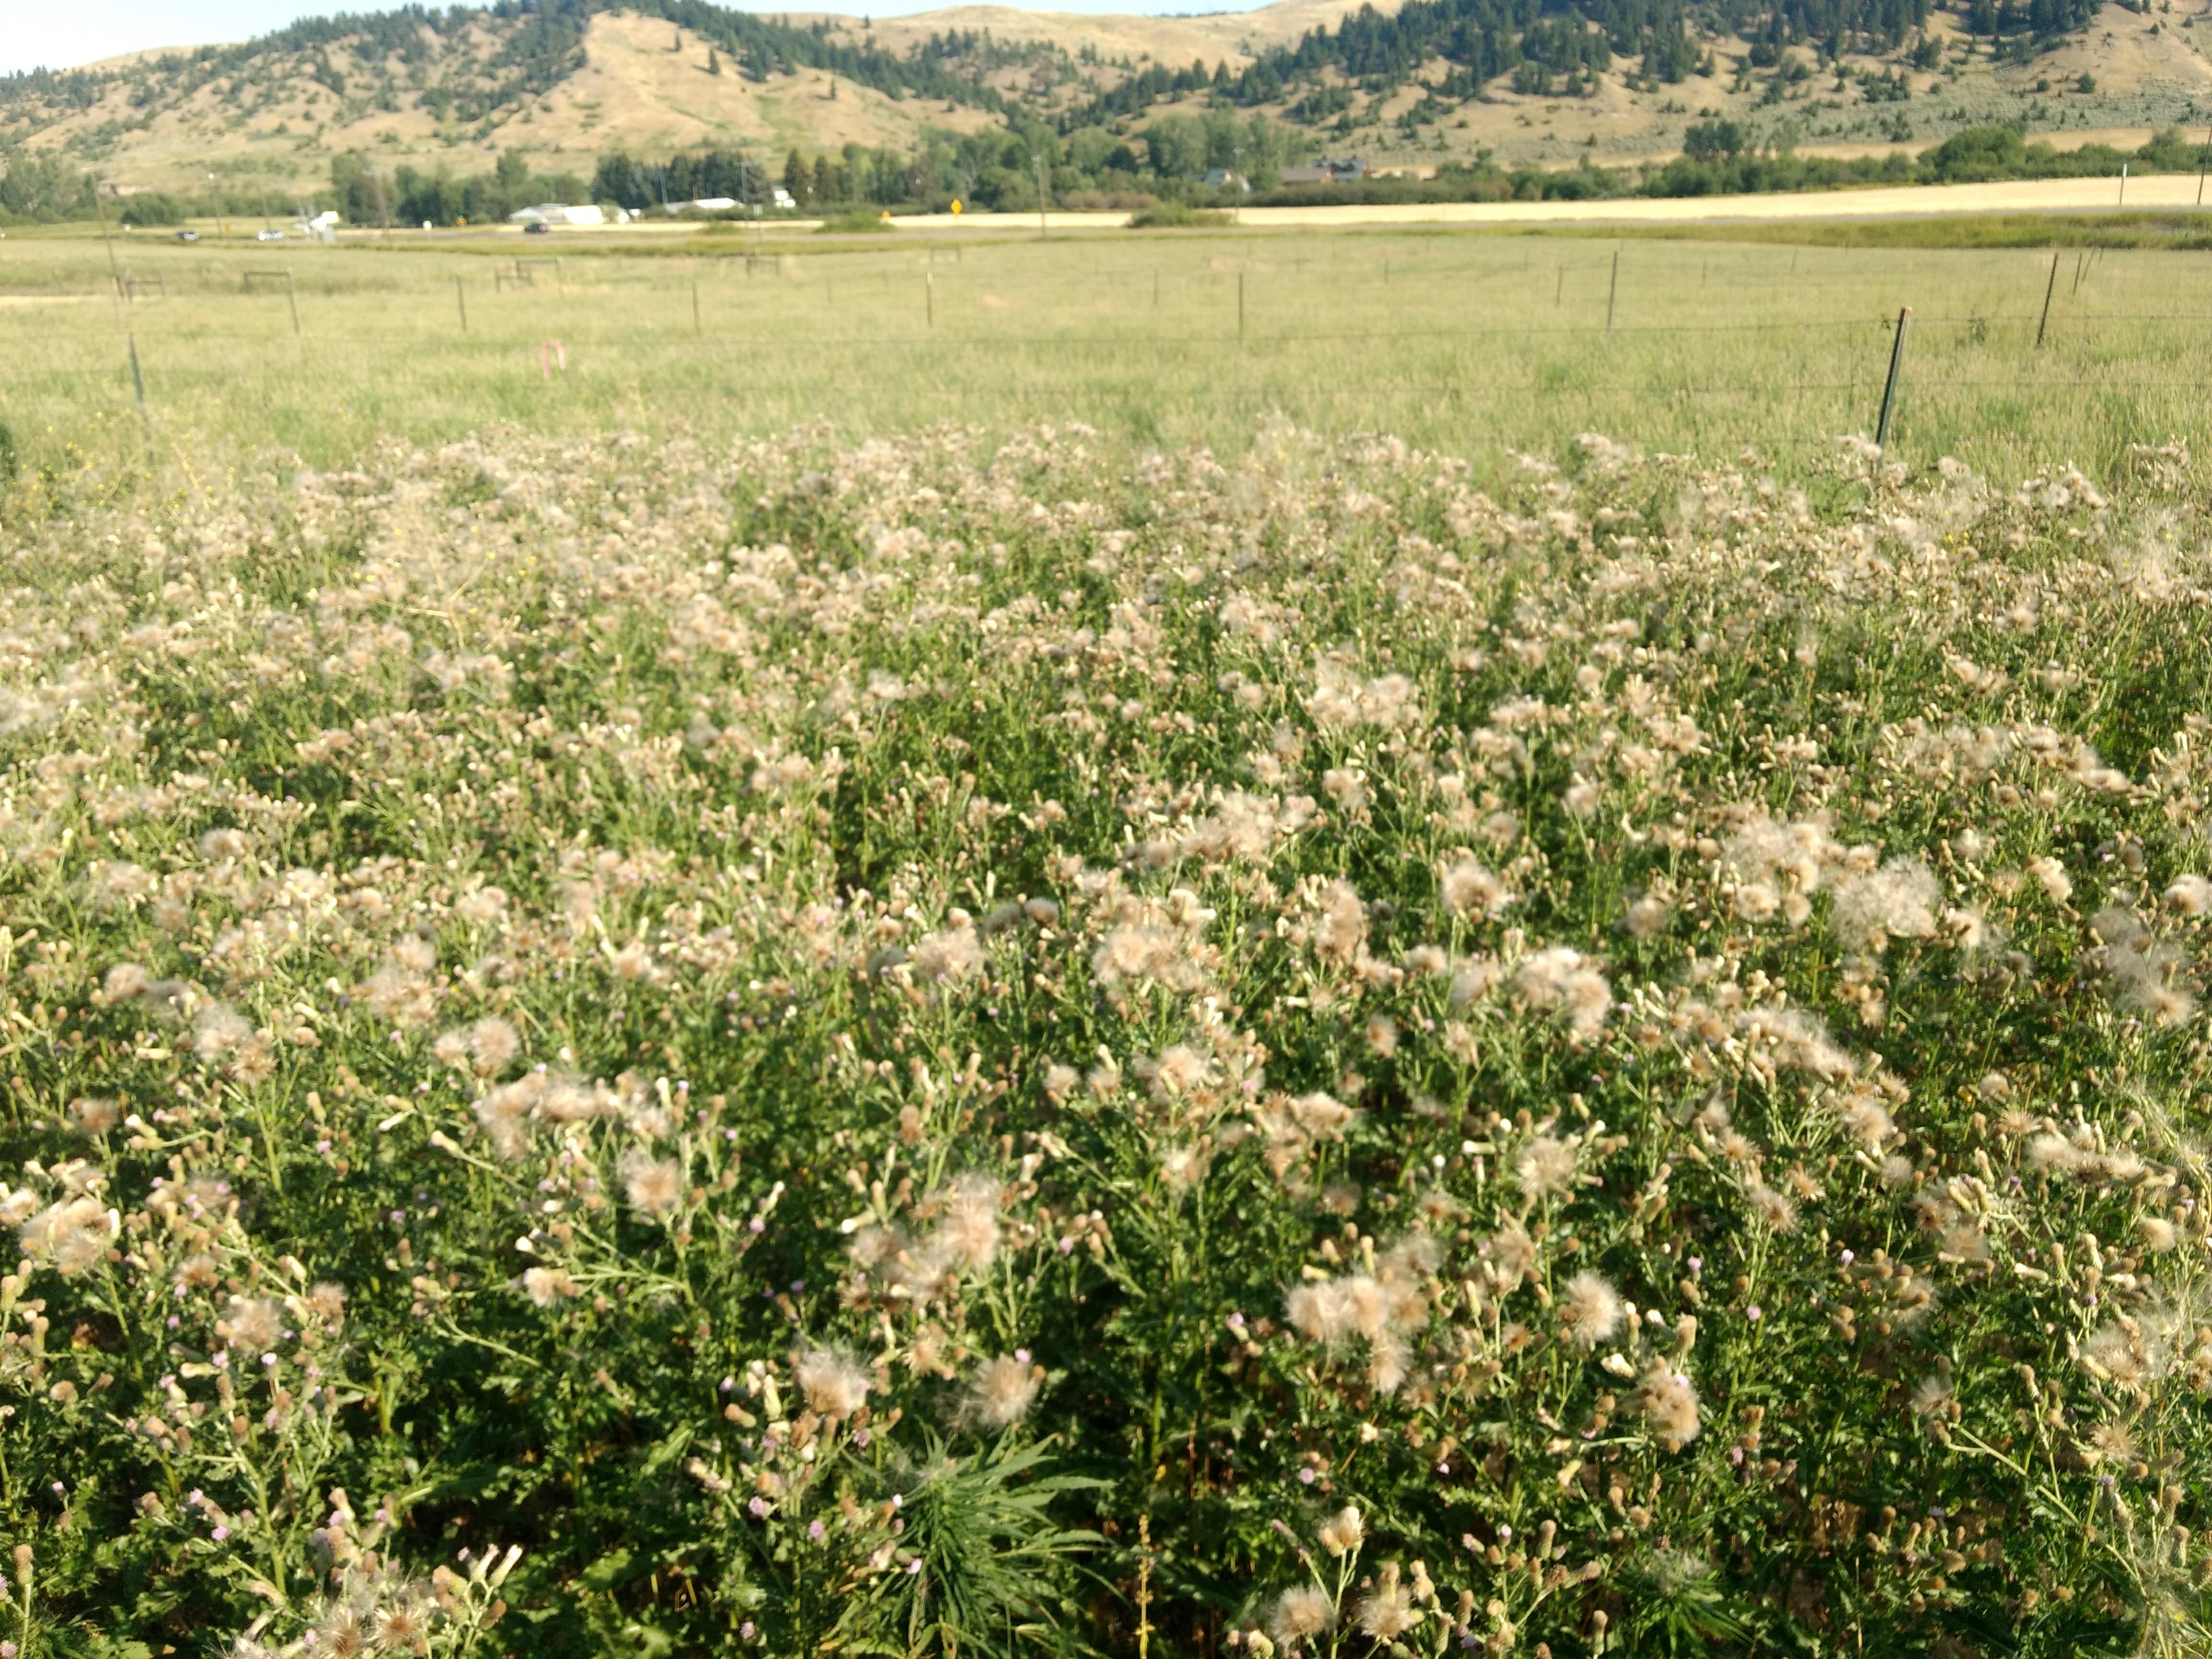 Hemp crop infested with Canada thistle at Ft. Ellis (Bozeman, MT)